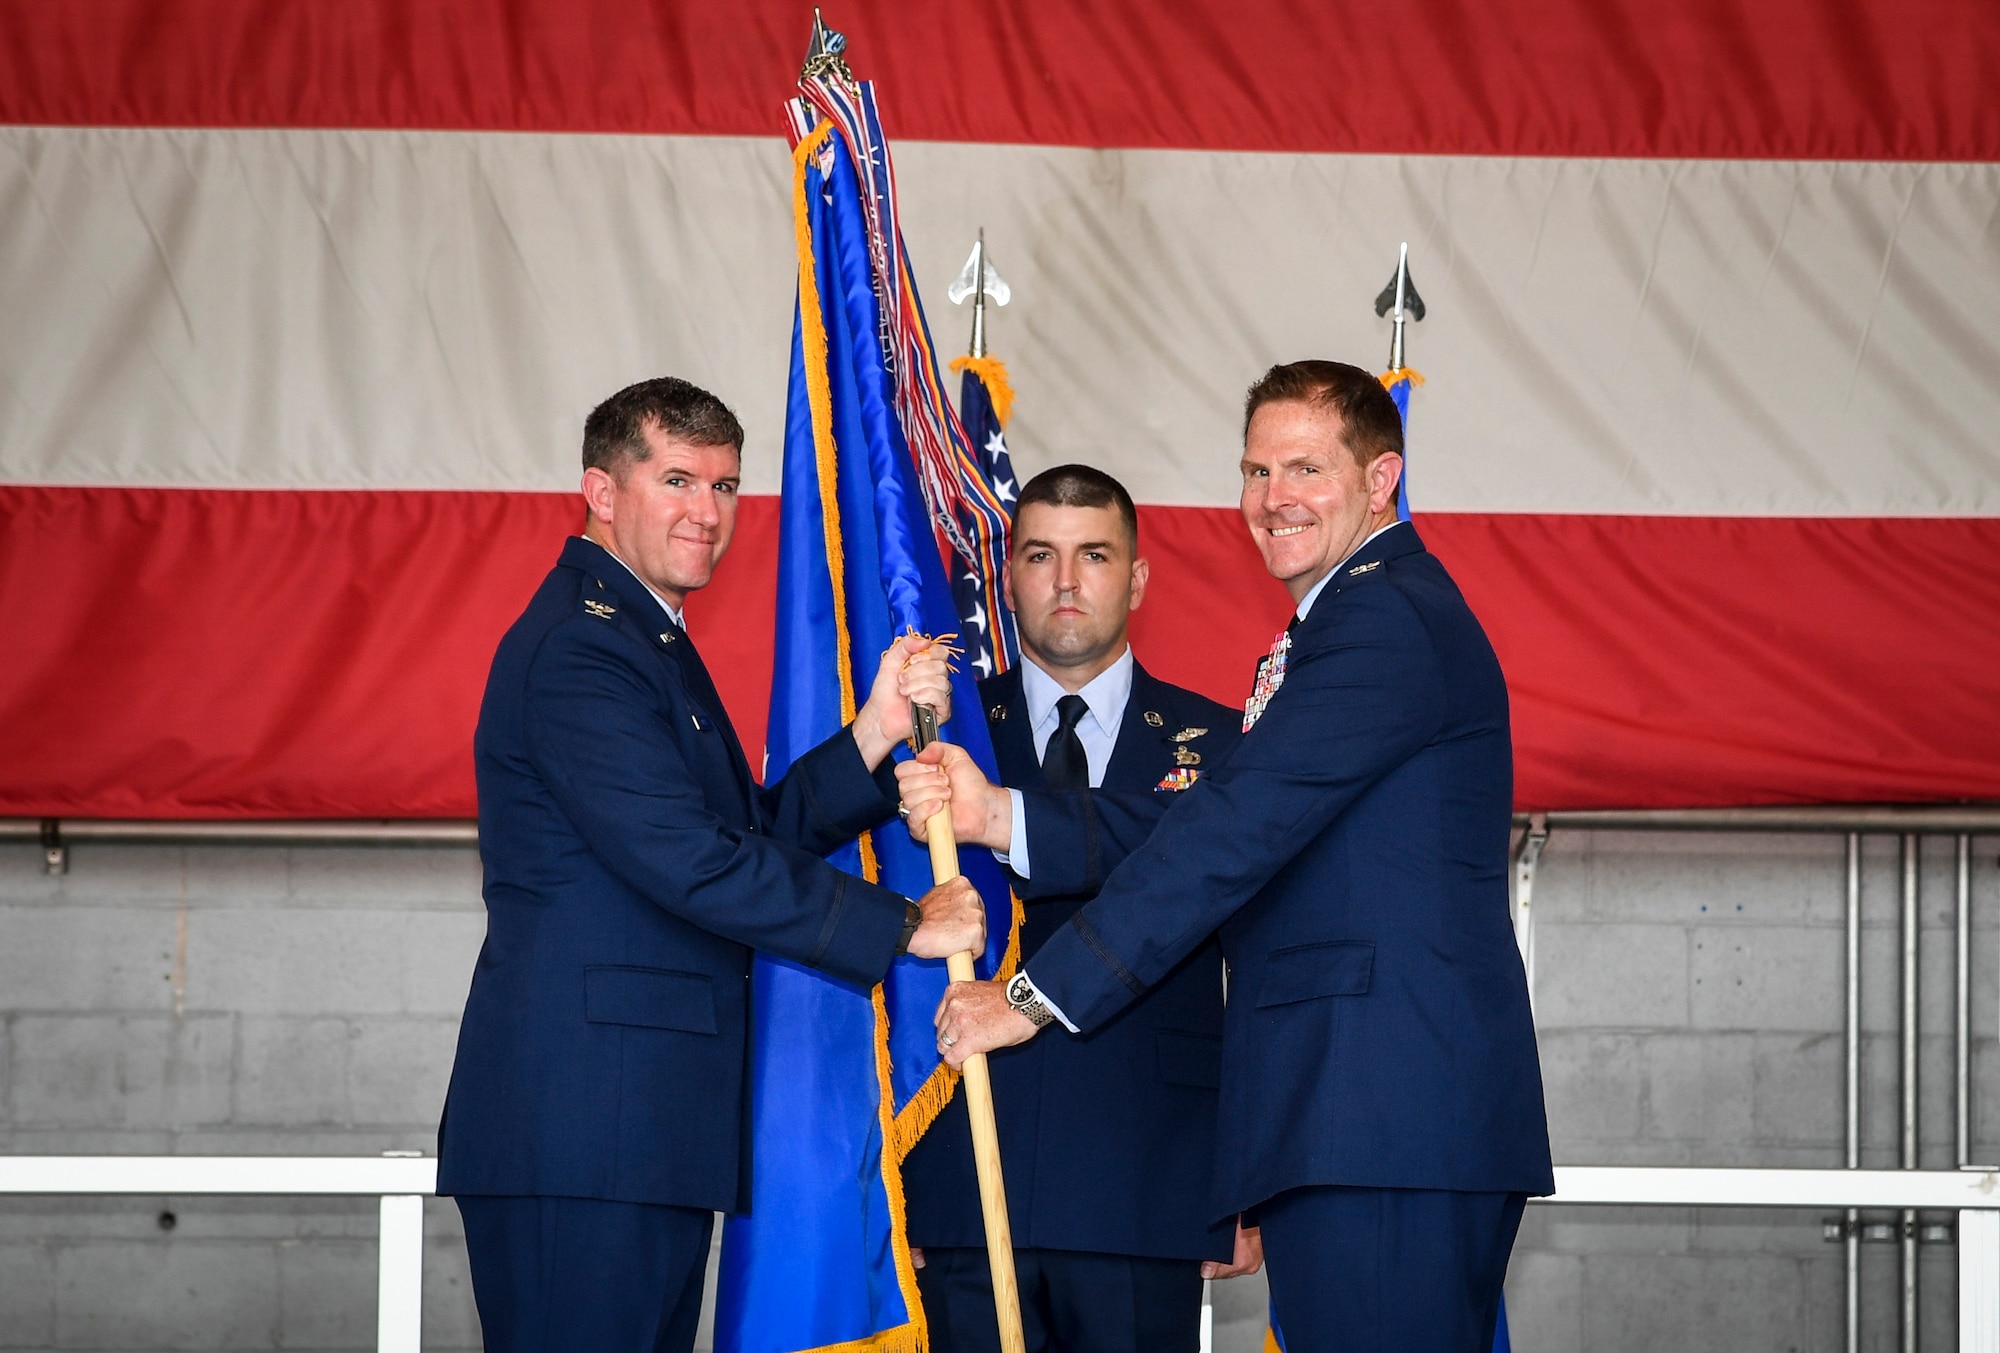 One Air Force members passes a guidon flag to another member.